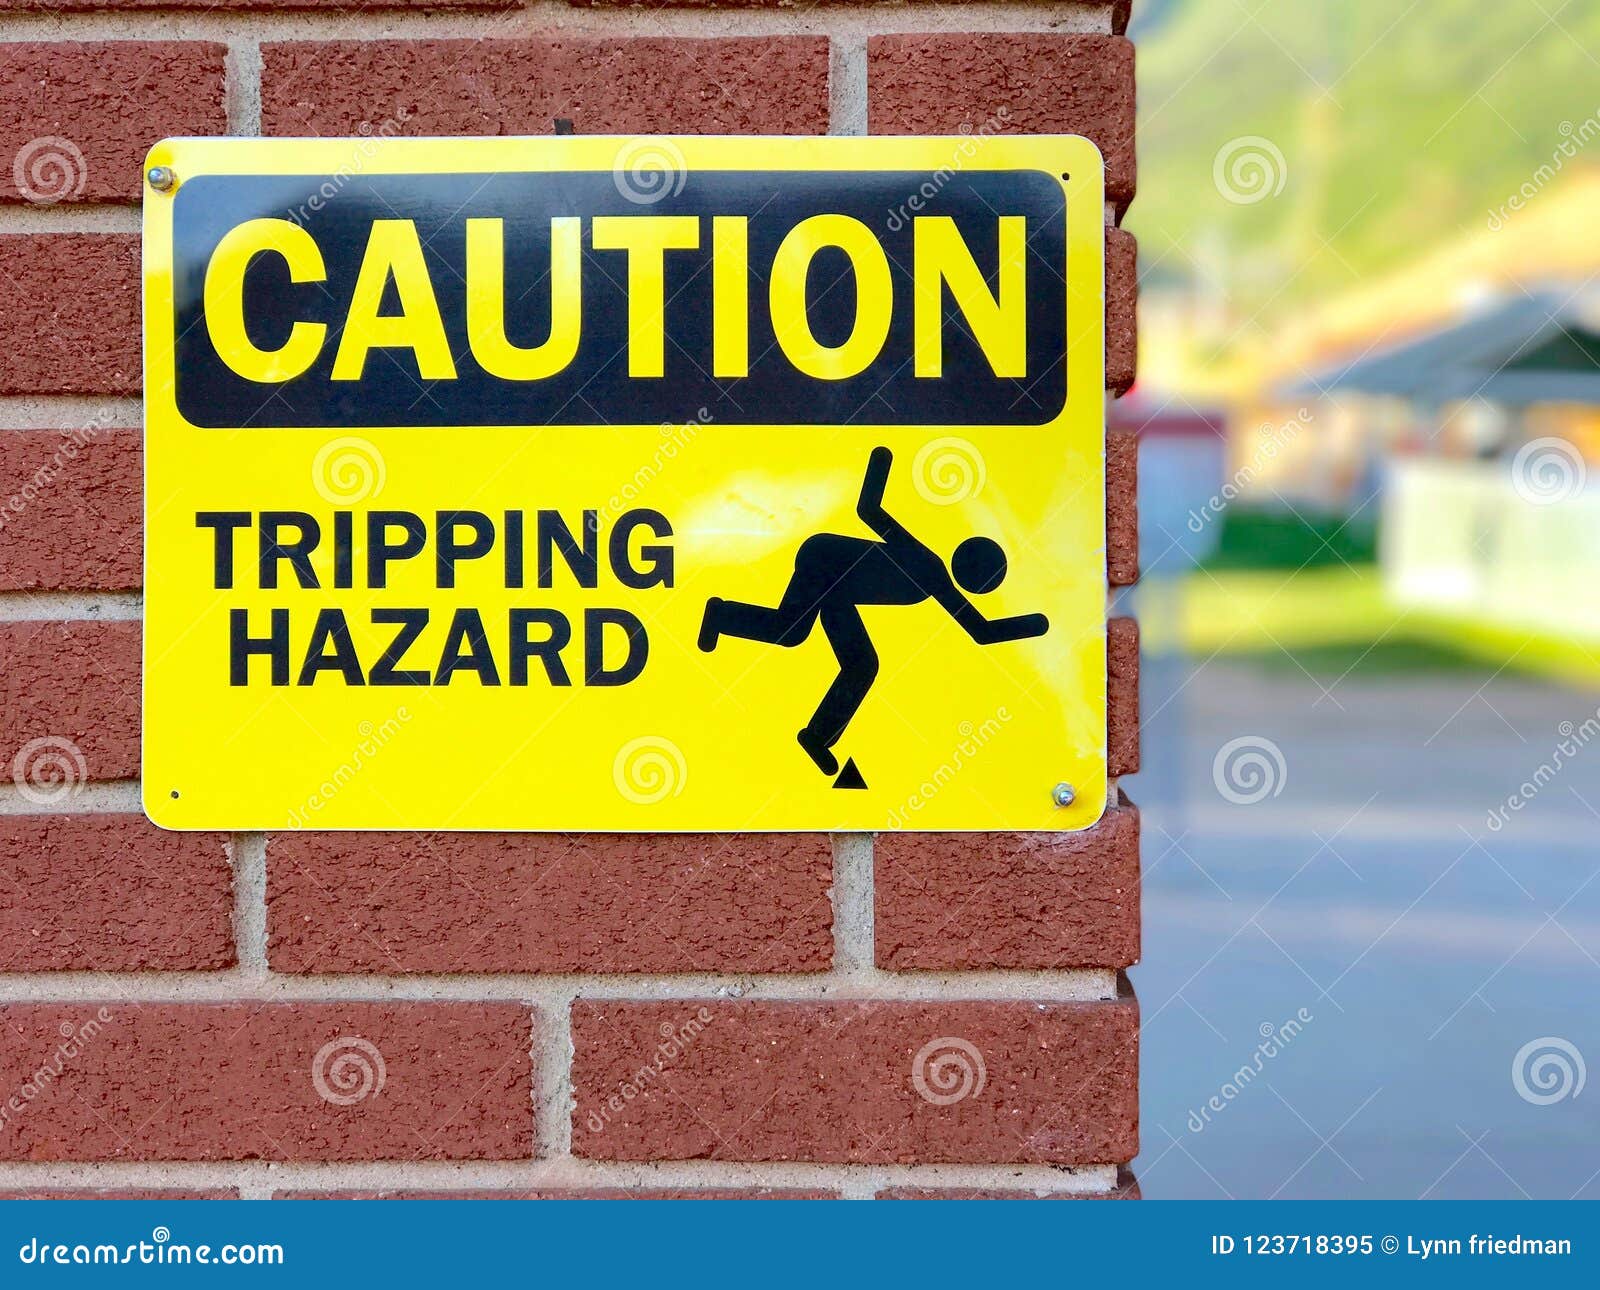 humorous yellow caution sign on red brick wall with stick man illustrating tripping hazard